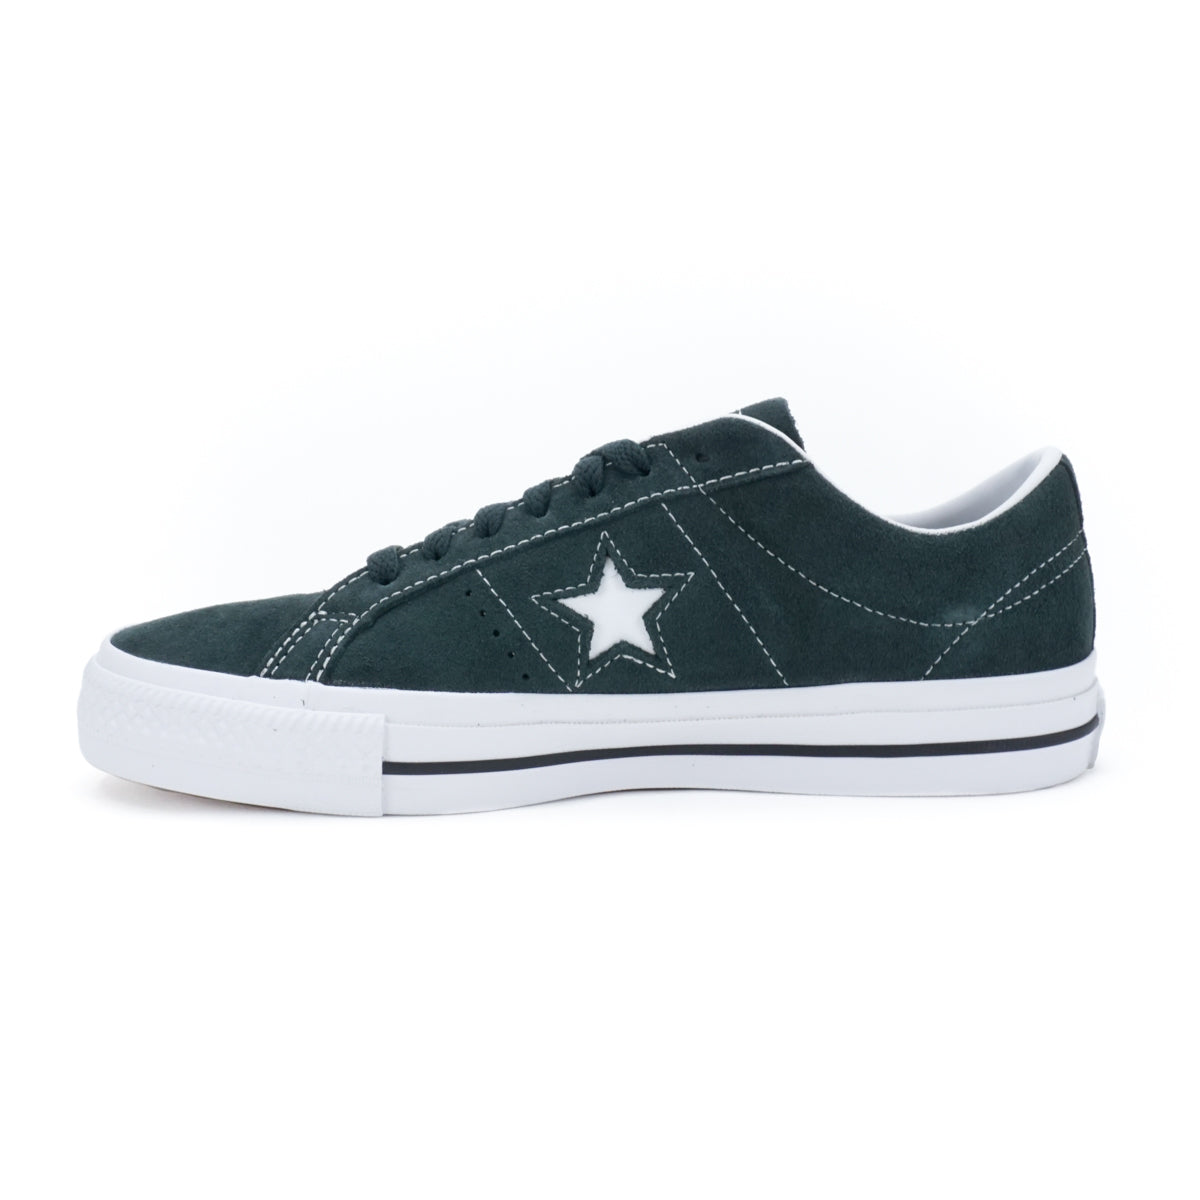 product image One Star Pro Suede - Seaweed/Black/White